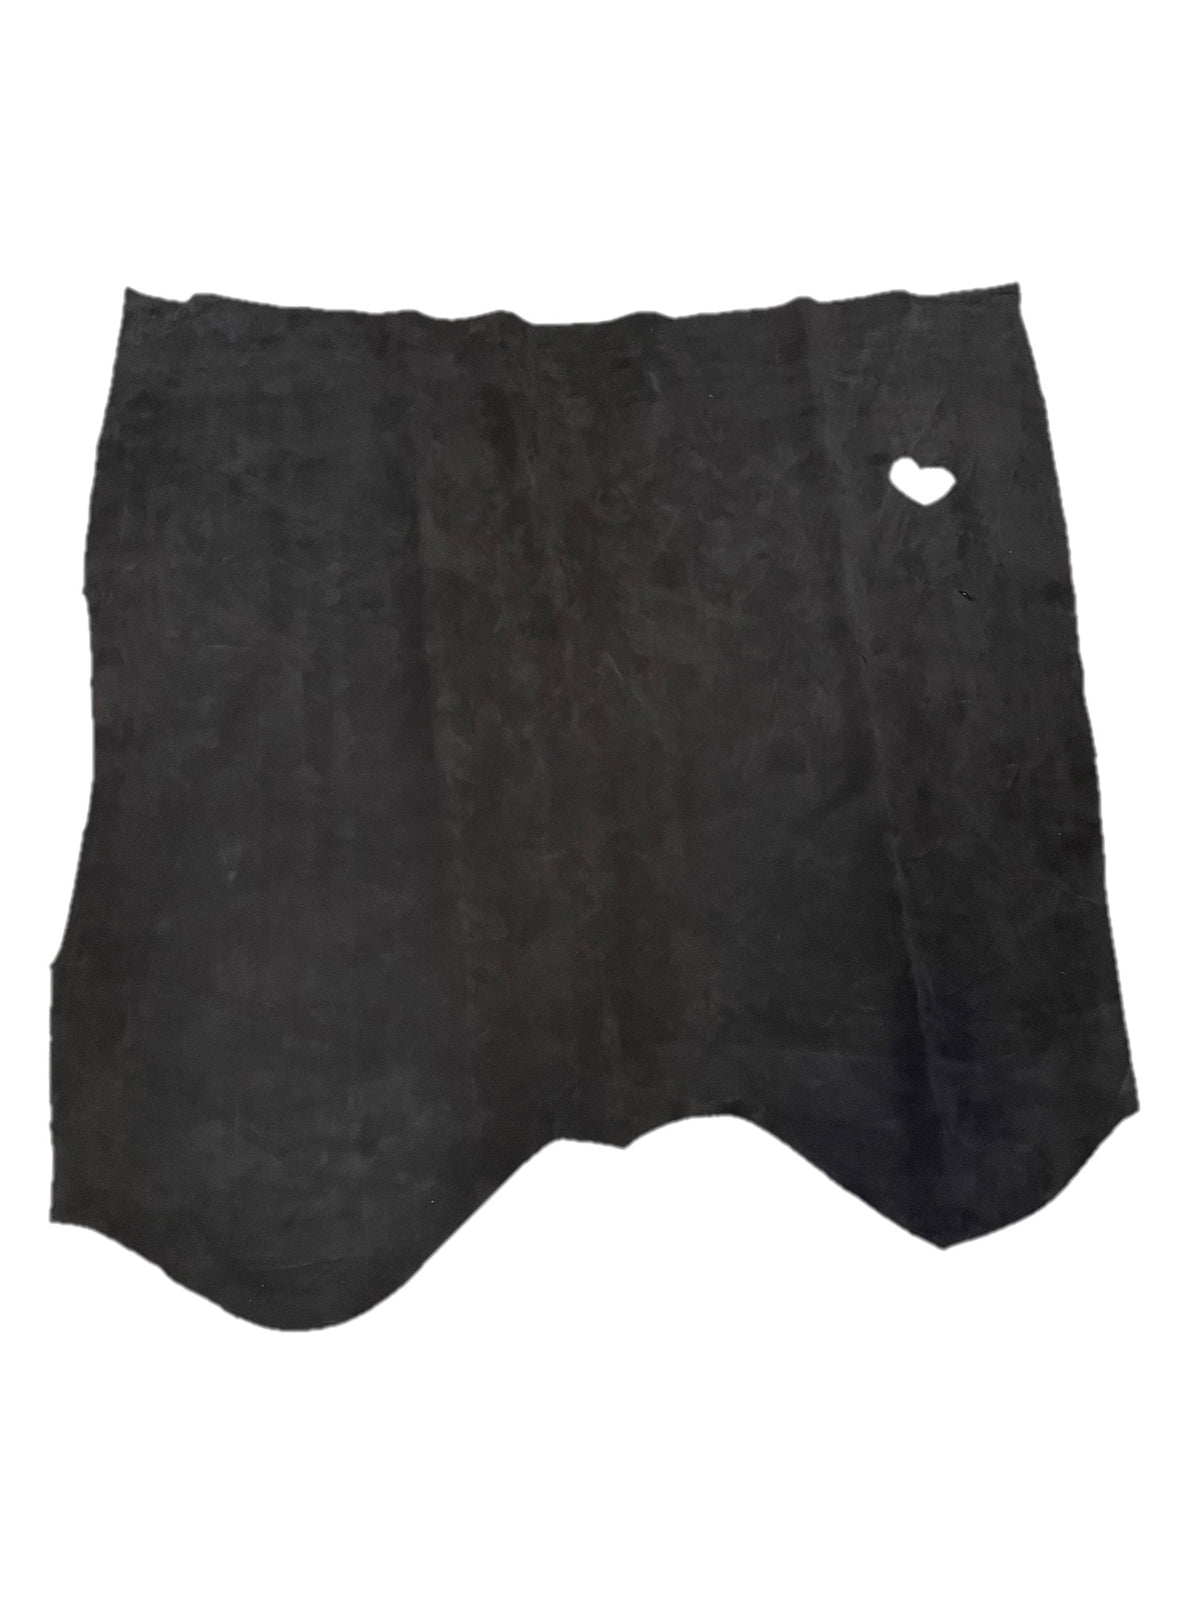 Cow Jersey Suede Double Butts | Black | 1.2 mm | 13 sq.ft | From $75 ea.